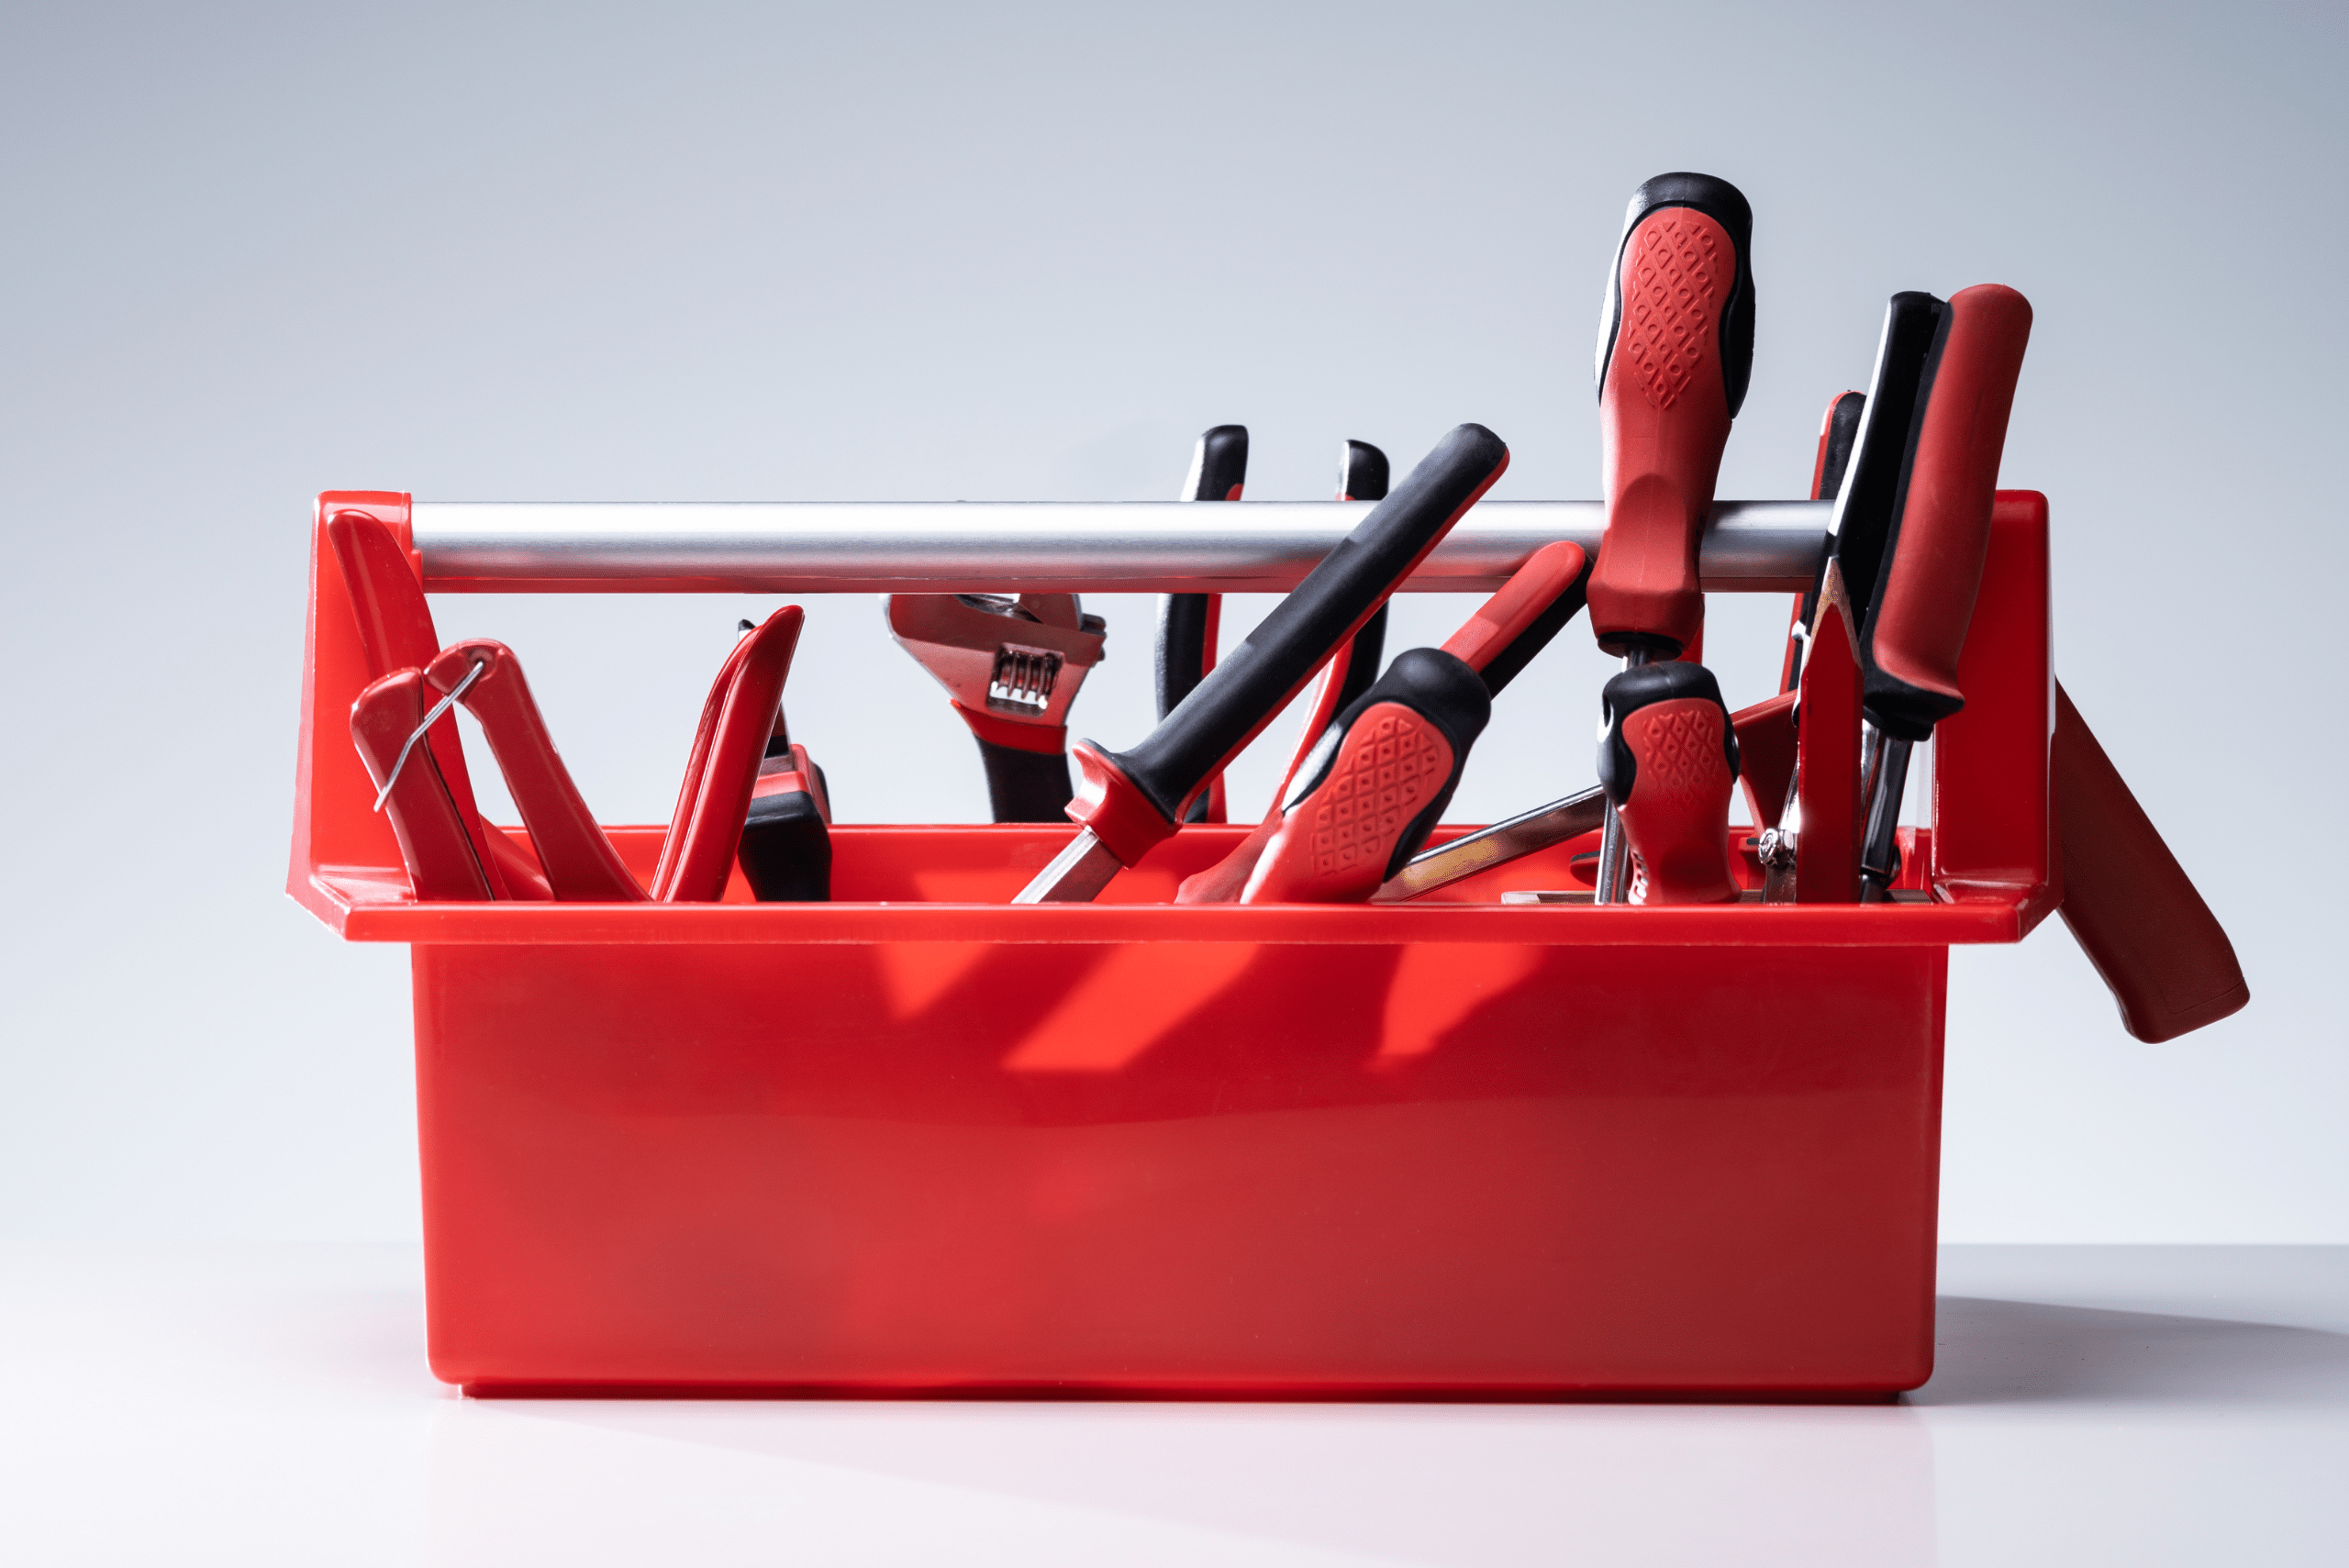 Red tool holder with an assortment of tools.